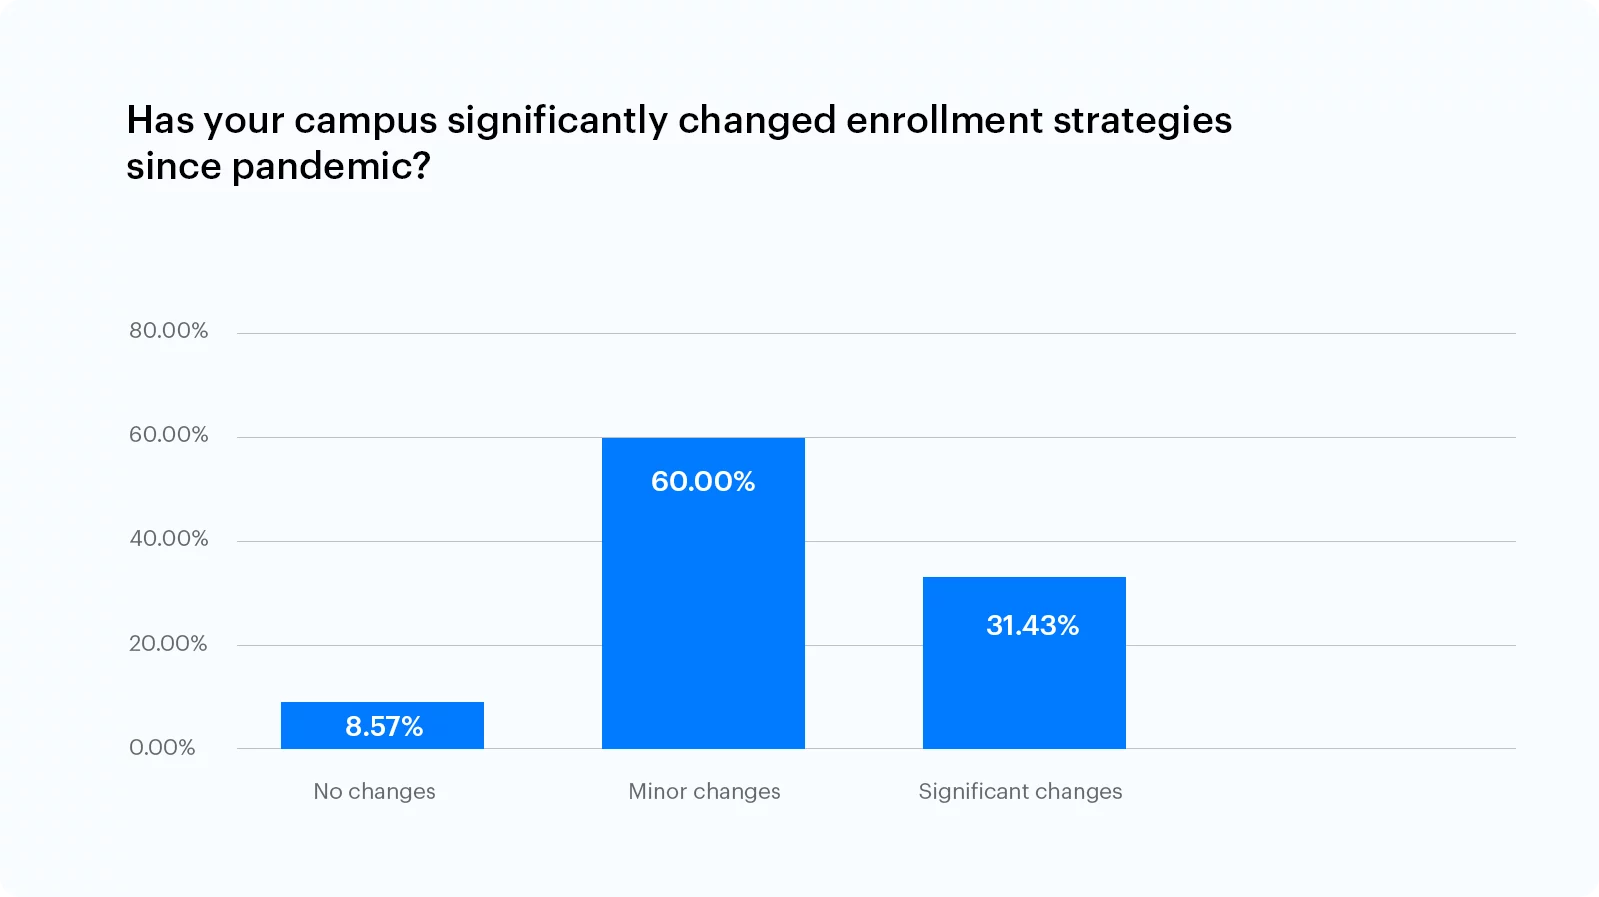 Has your campus significantly changed enrollment strategies since pandemic?